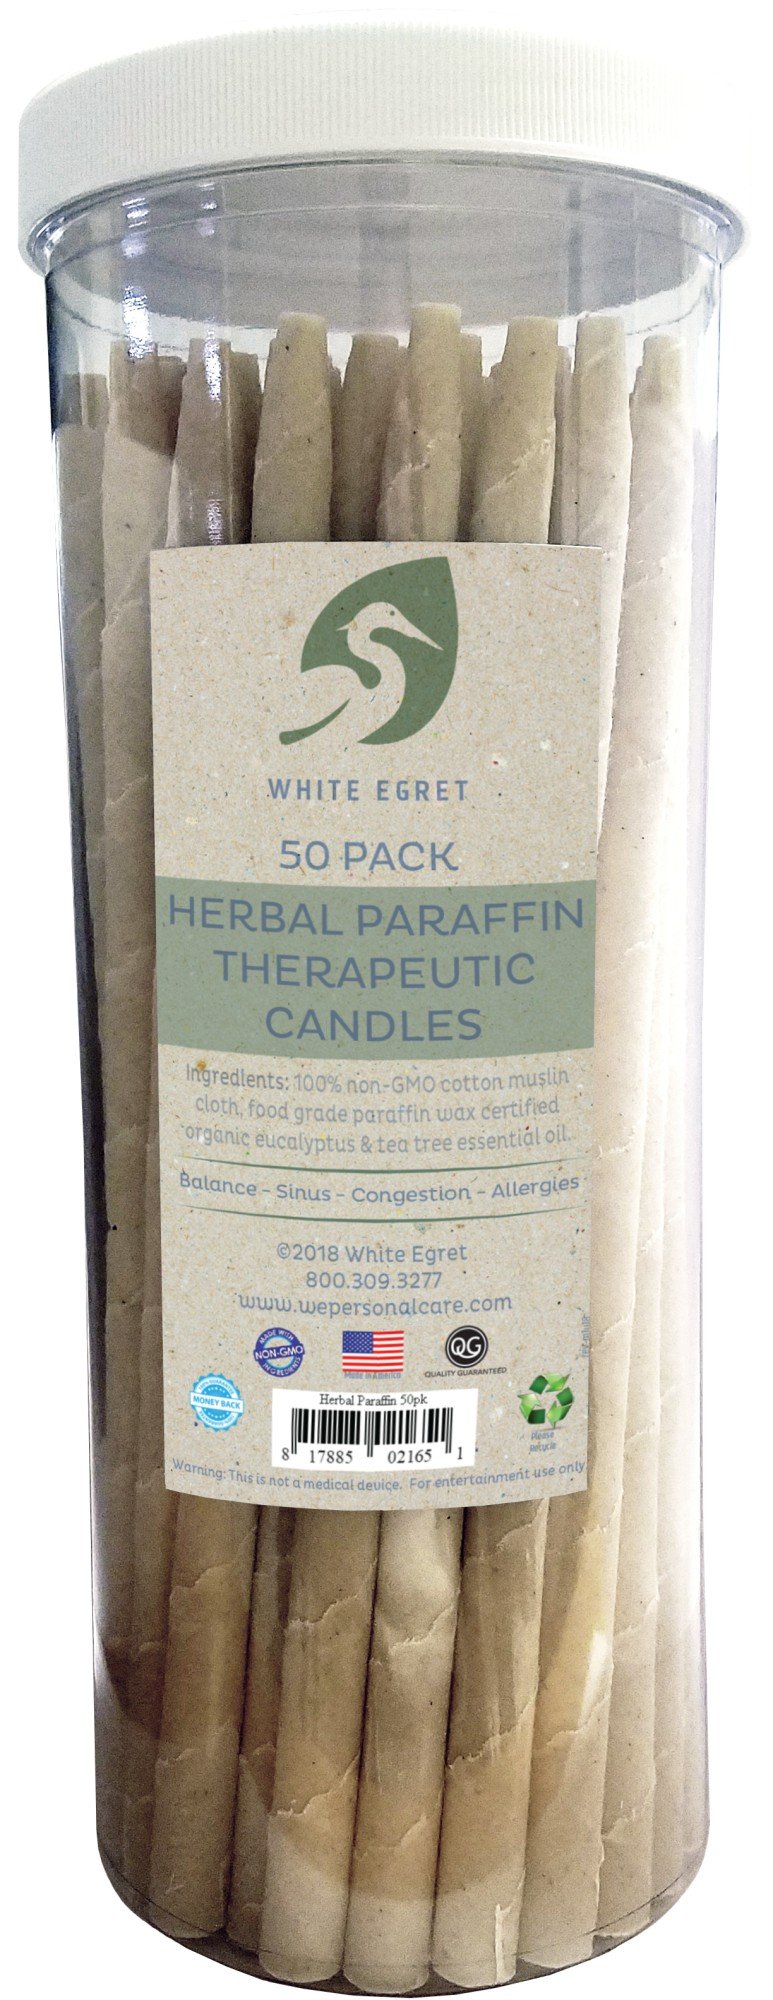 White Egret INC Herbal Paraffin 1/2 Inch Candle 50 Pack Container